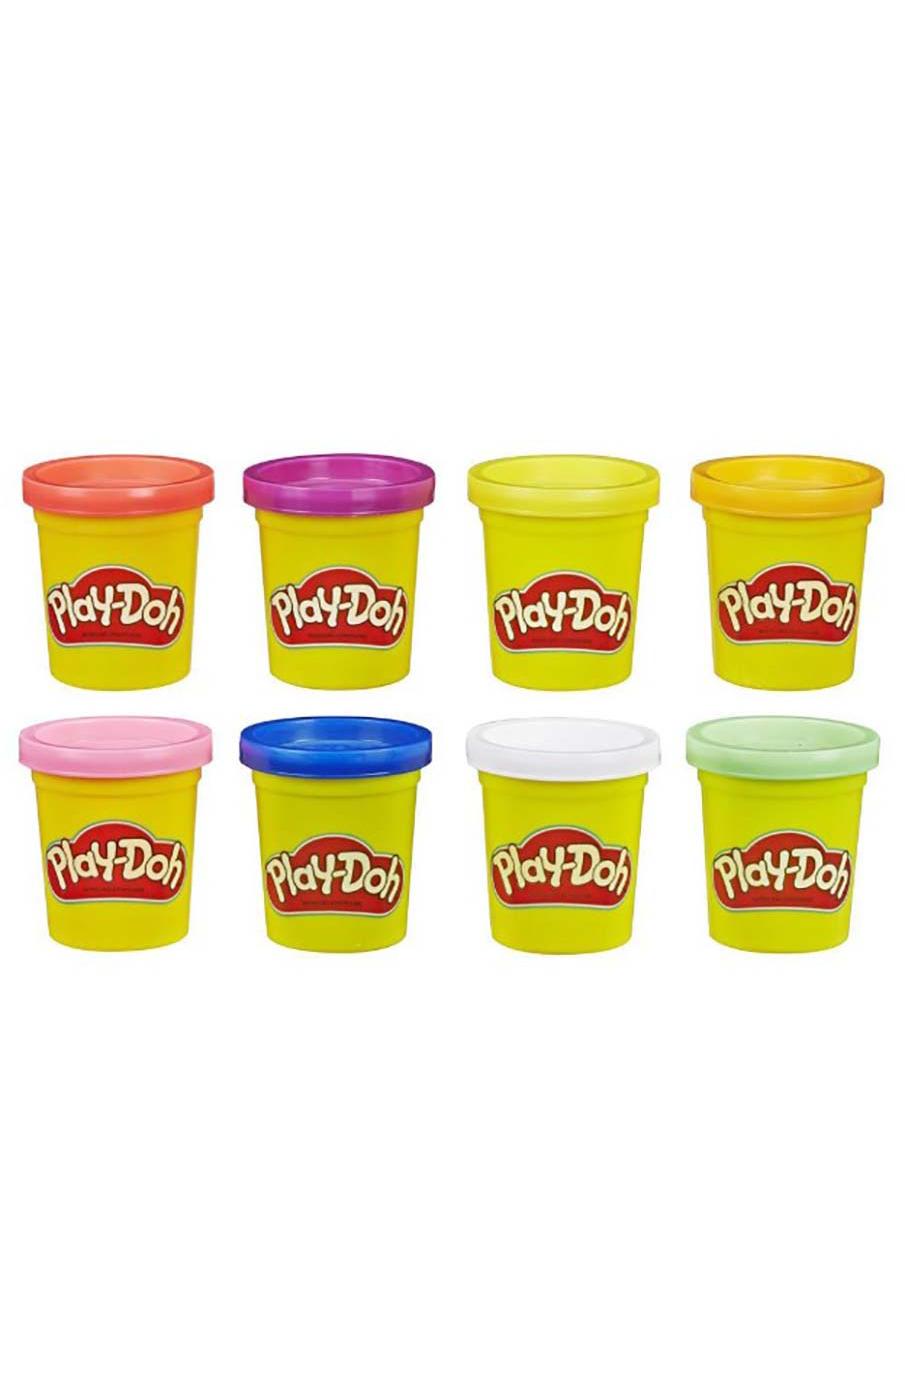 Play-Doh Rainbow Colors Set; image 2 of 2